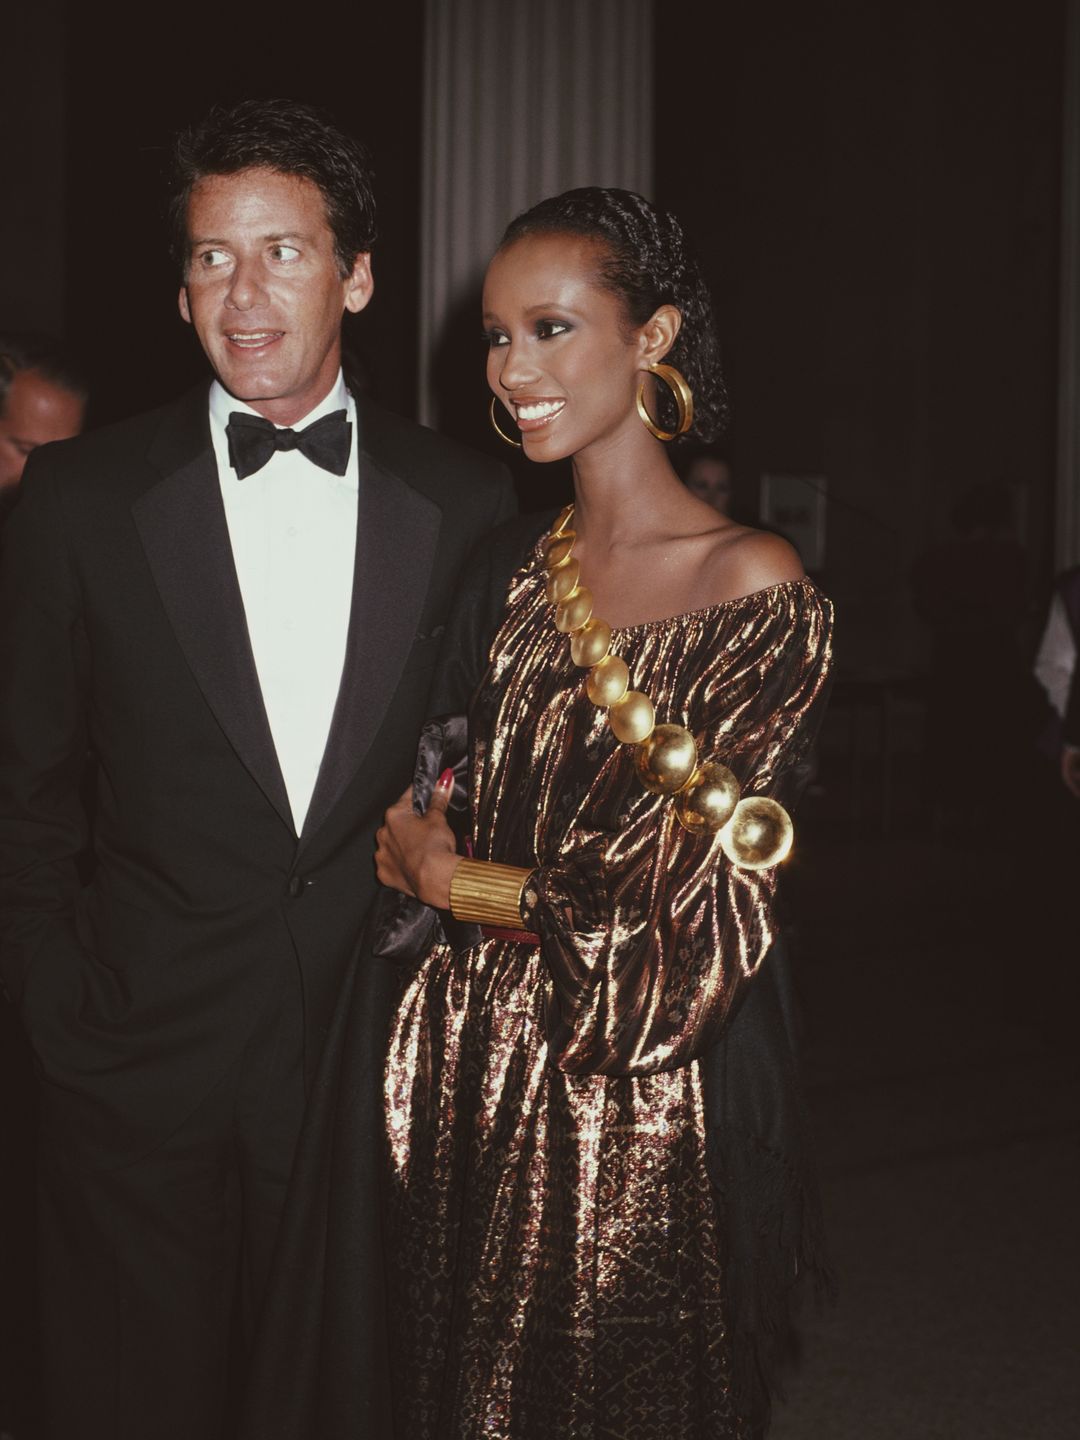 American fashion designer Calvin Klein and Somali fashion model Iman at the Met Gala, Metropolitan Museum of Art, New York City, USA, December 1981. (Photo by Rose Hartman/Archive Photos/Getty Images)